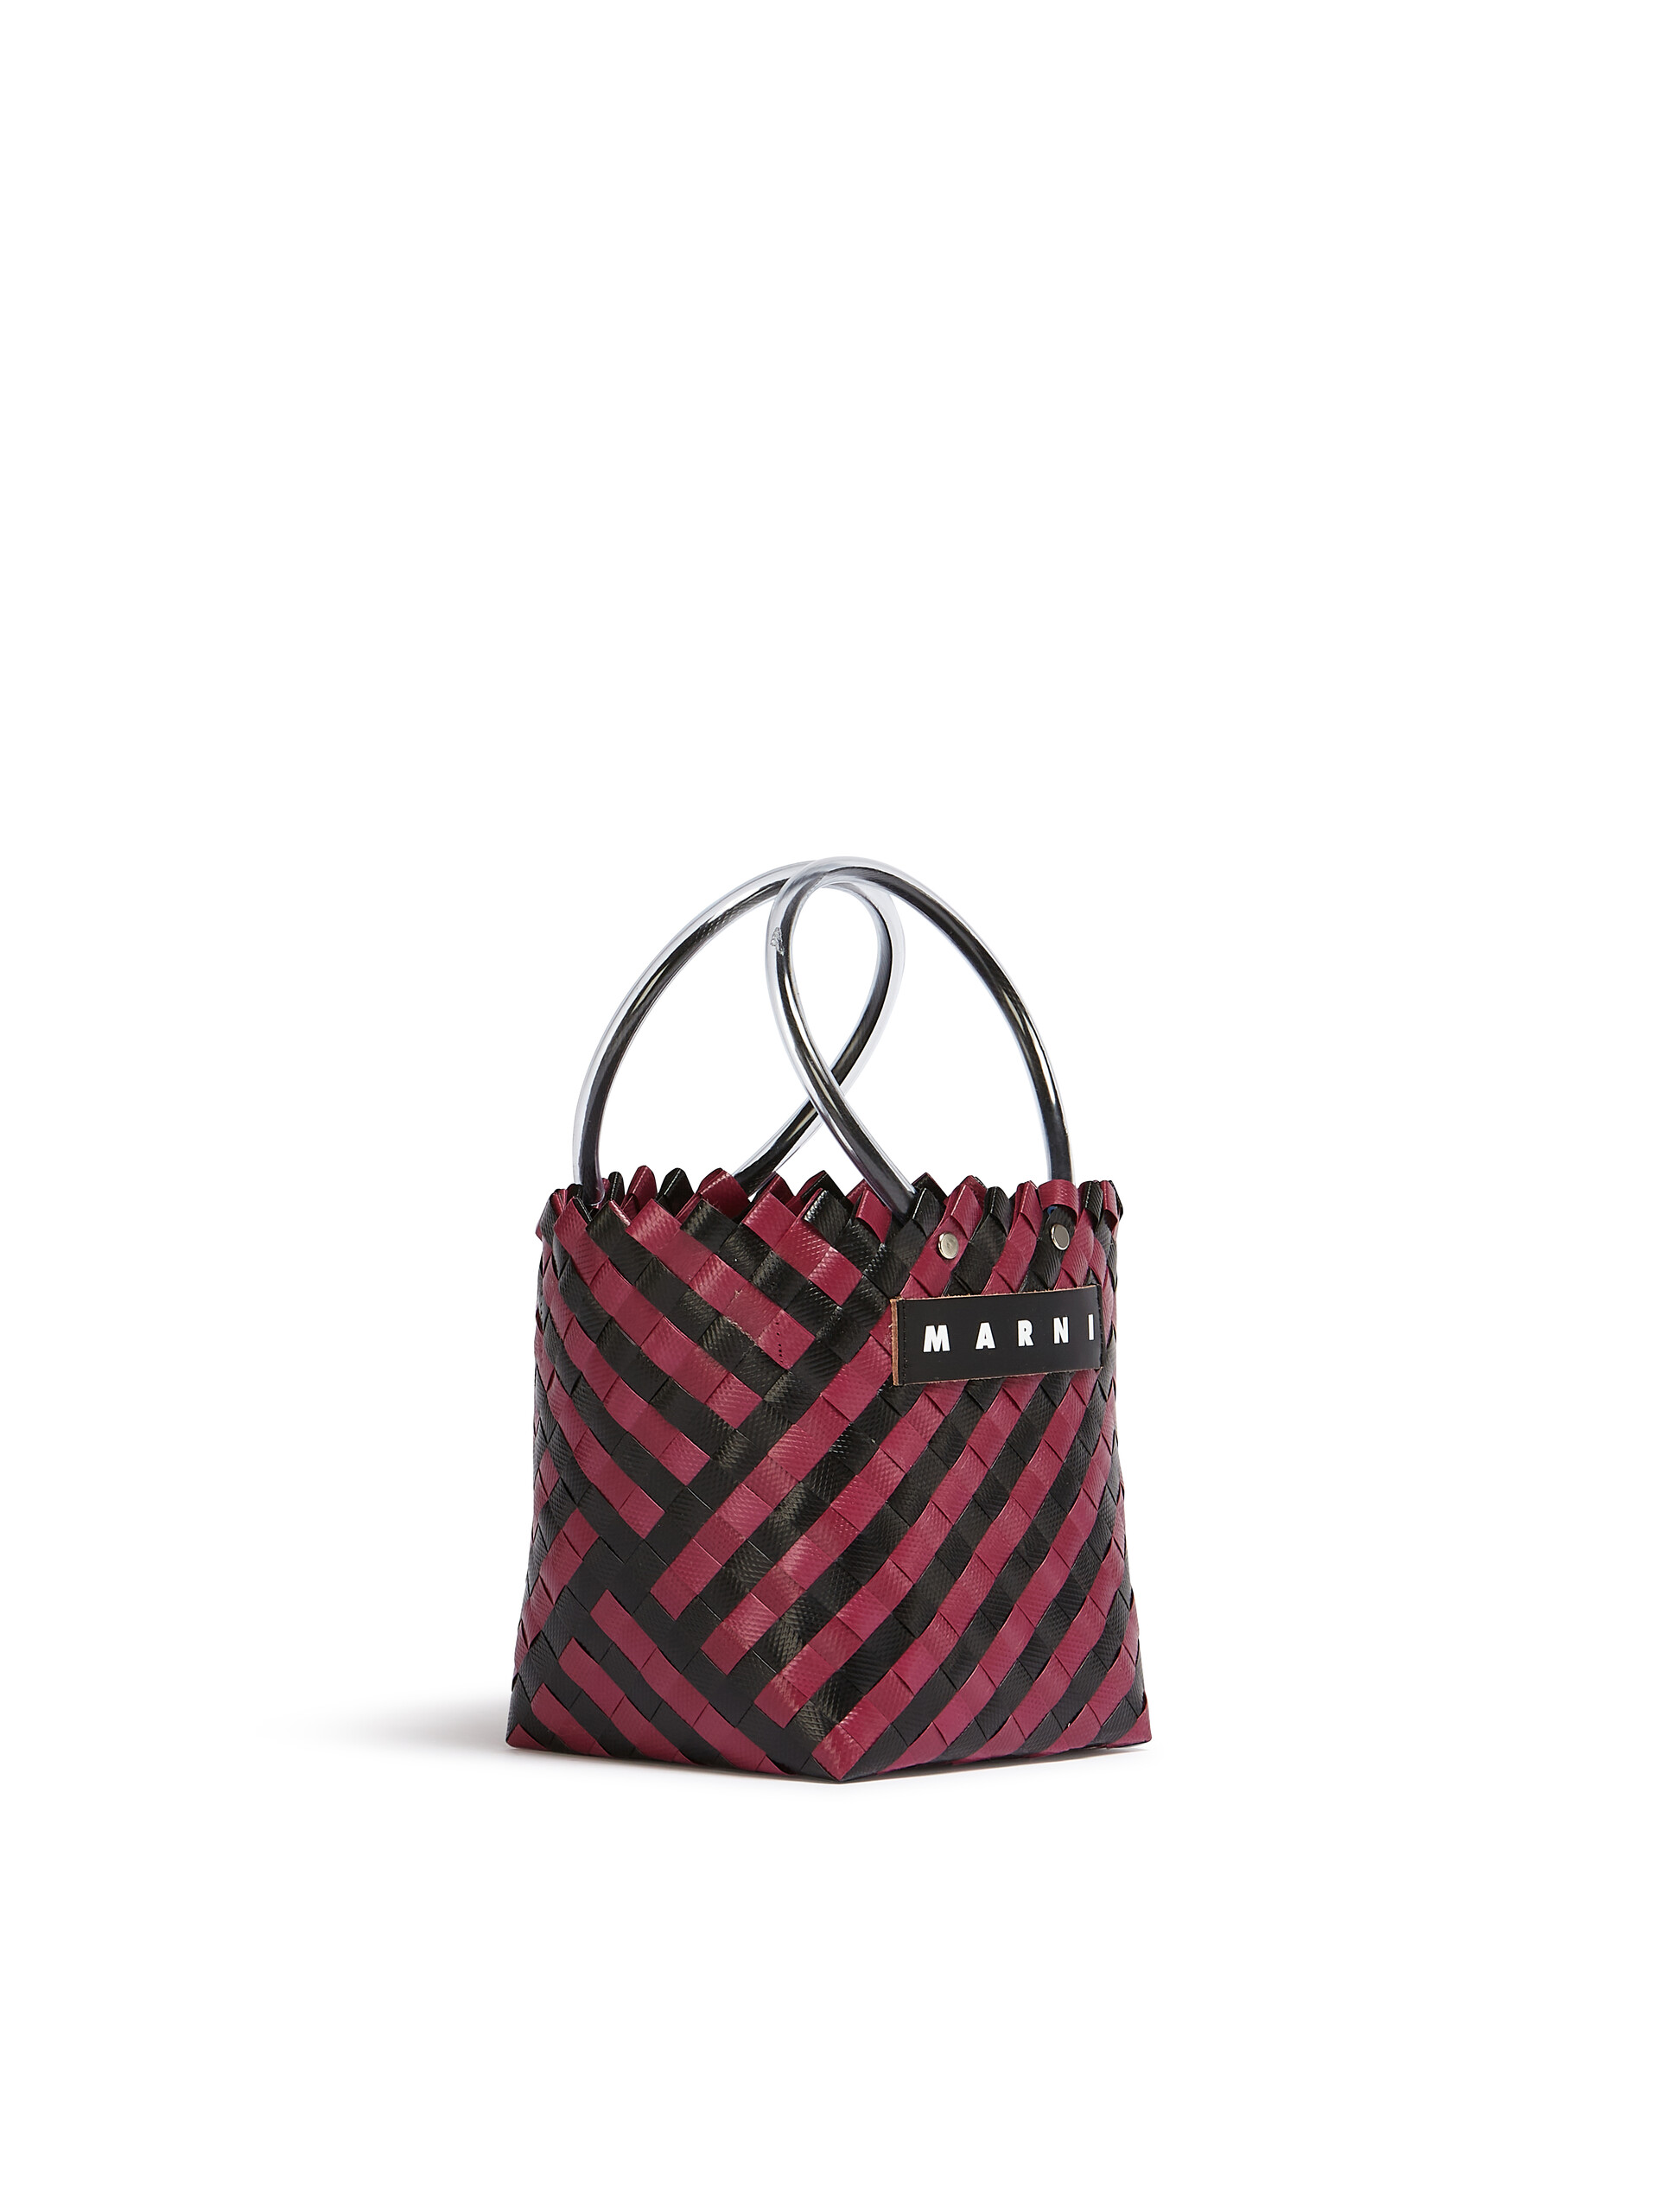 MARNI MARKET TAHA bag in black and burgundy woven material - Shopping Bags - Image 2